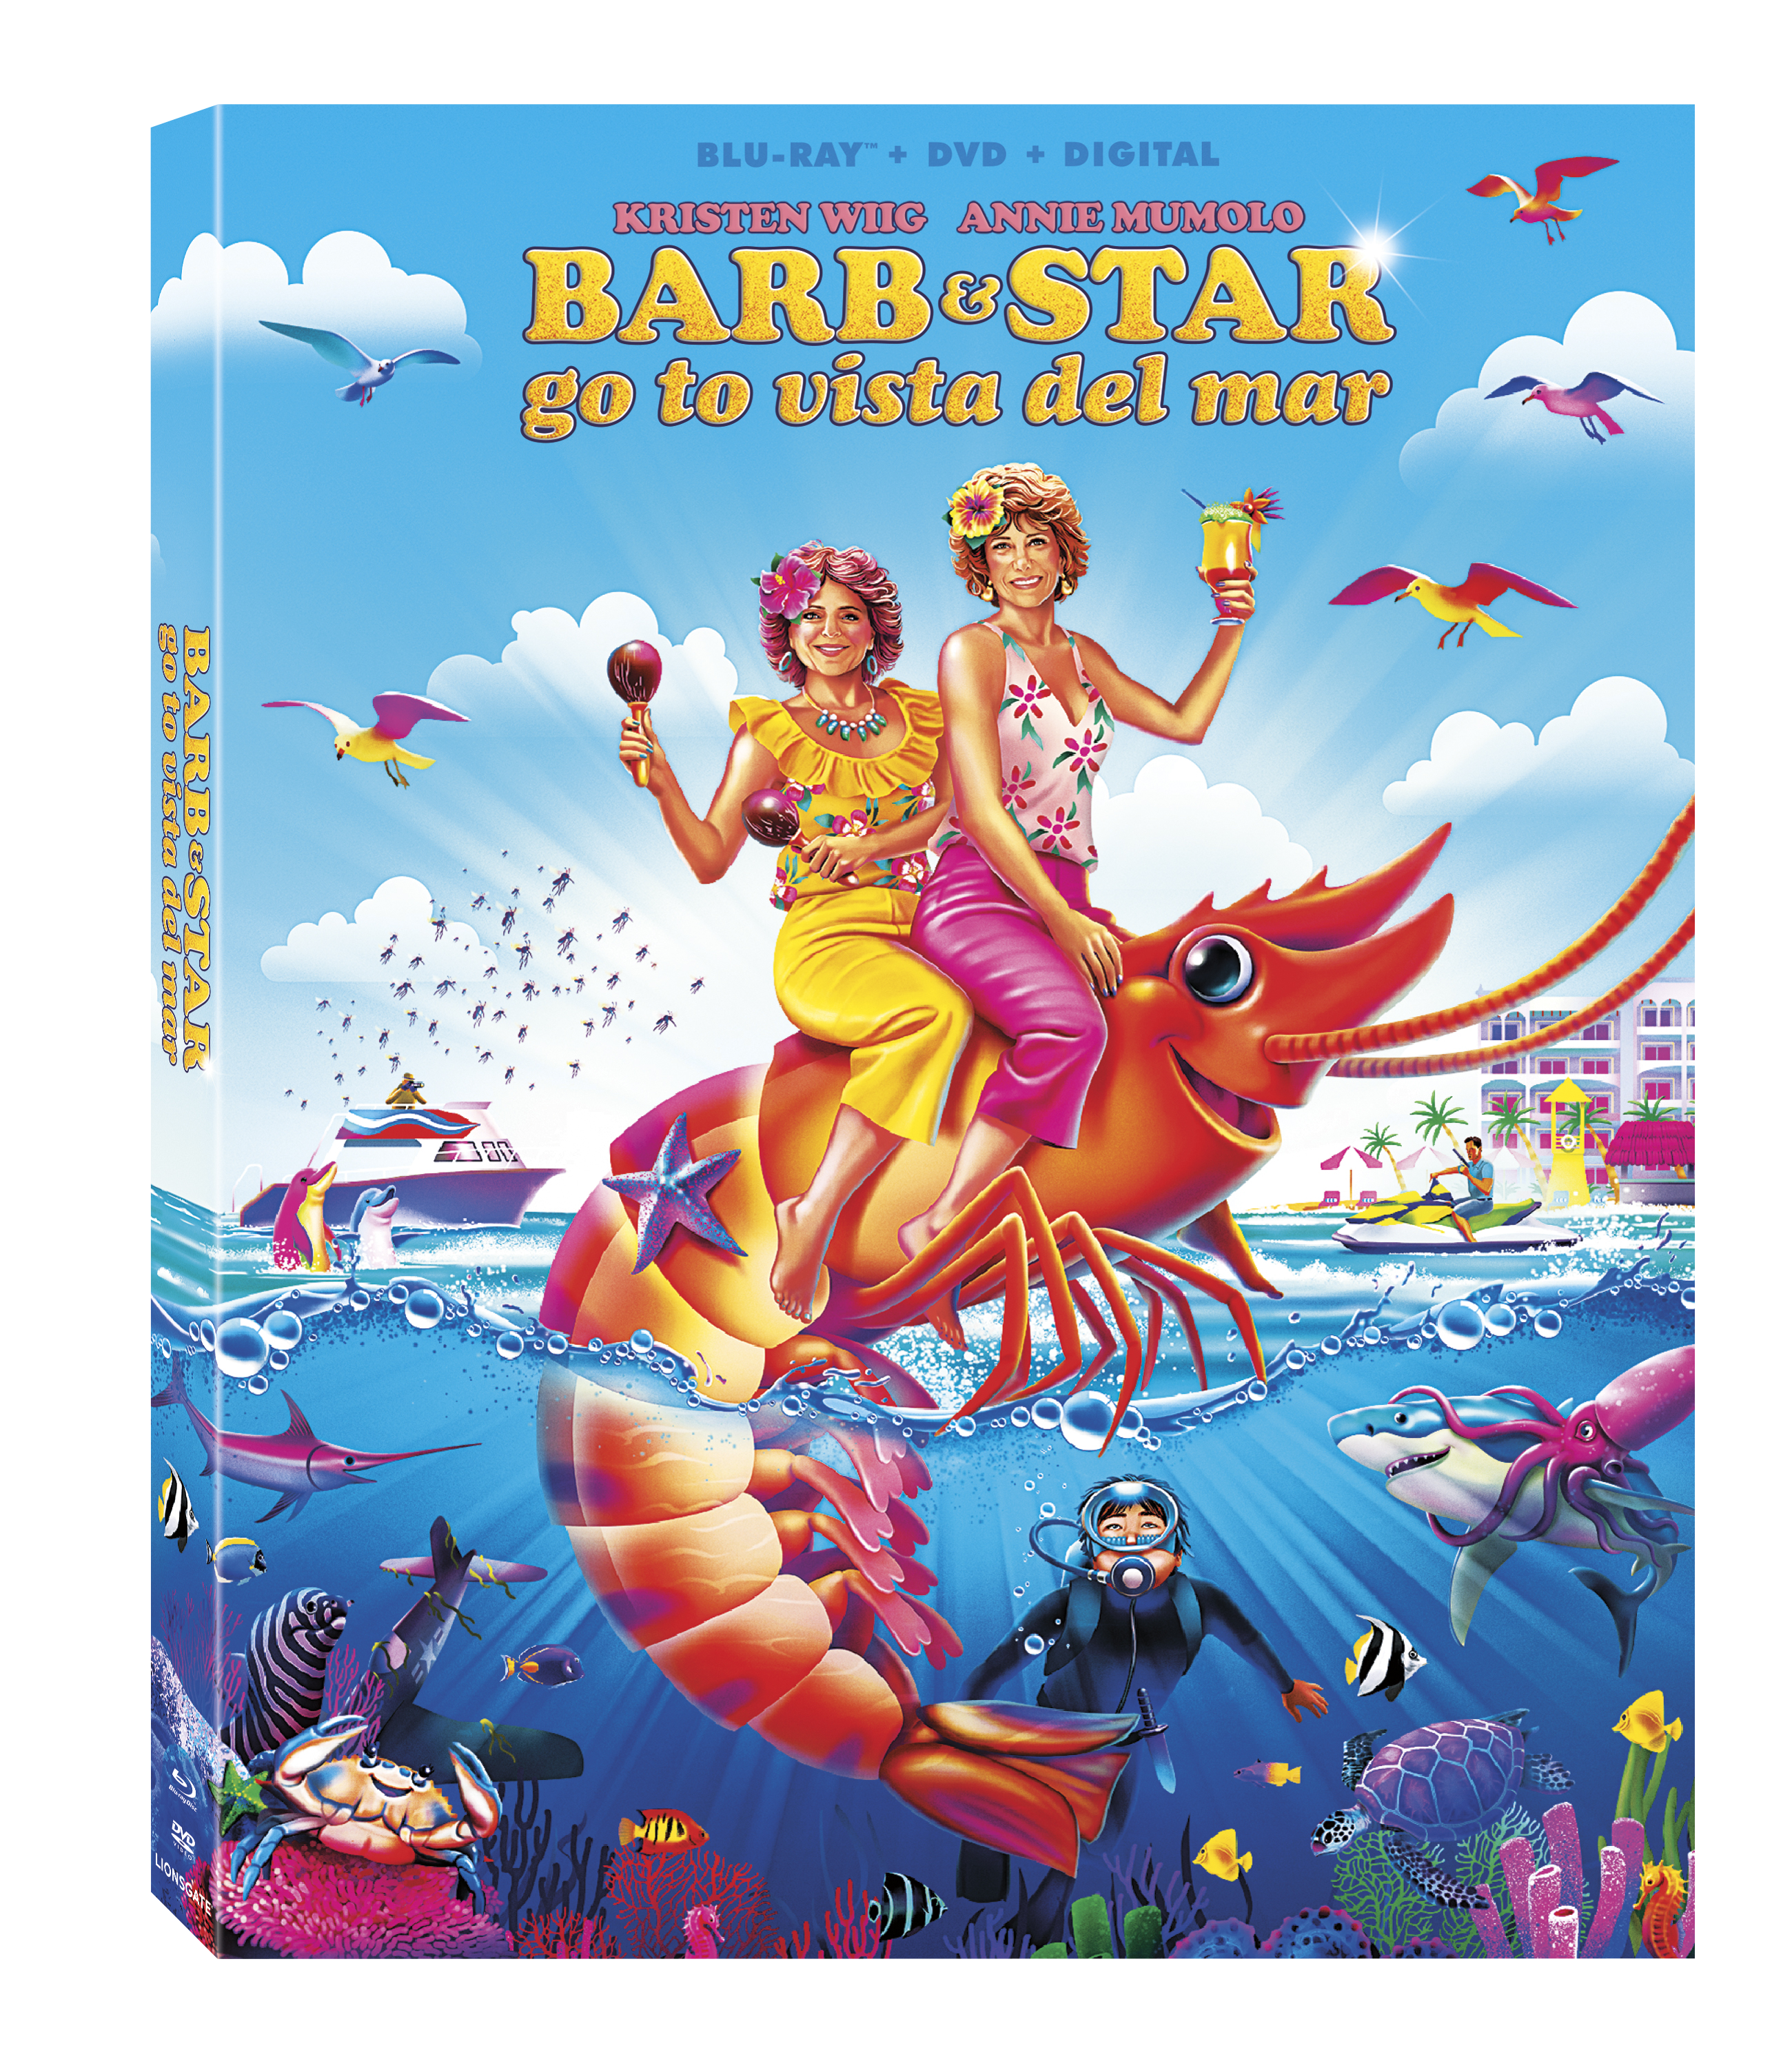 Get the Blu-ray/DVD/Digital Combo Pack of BARB & STAR GO TO VISTA DEL MAR